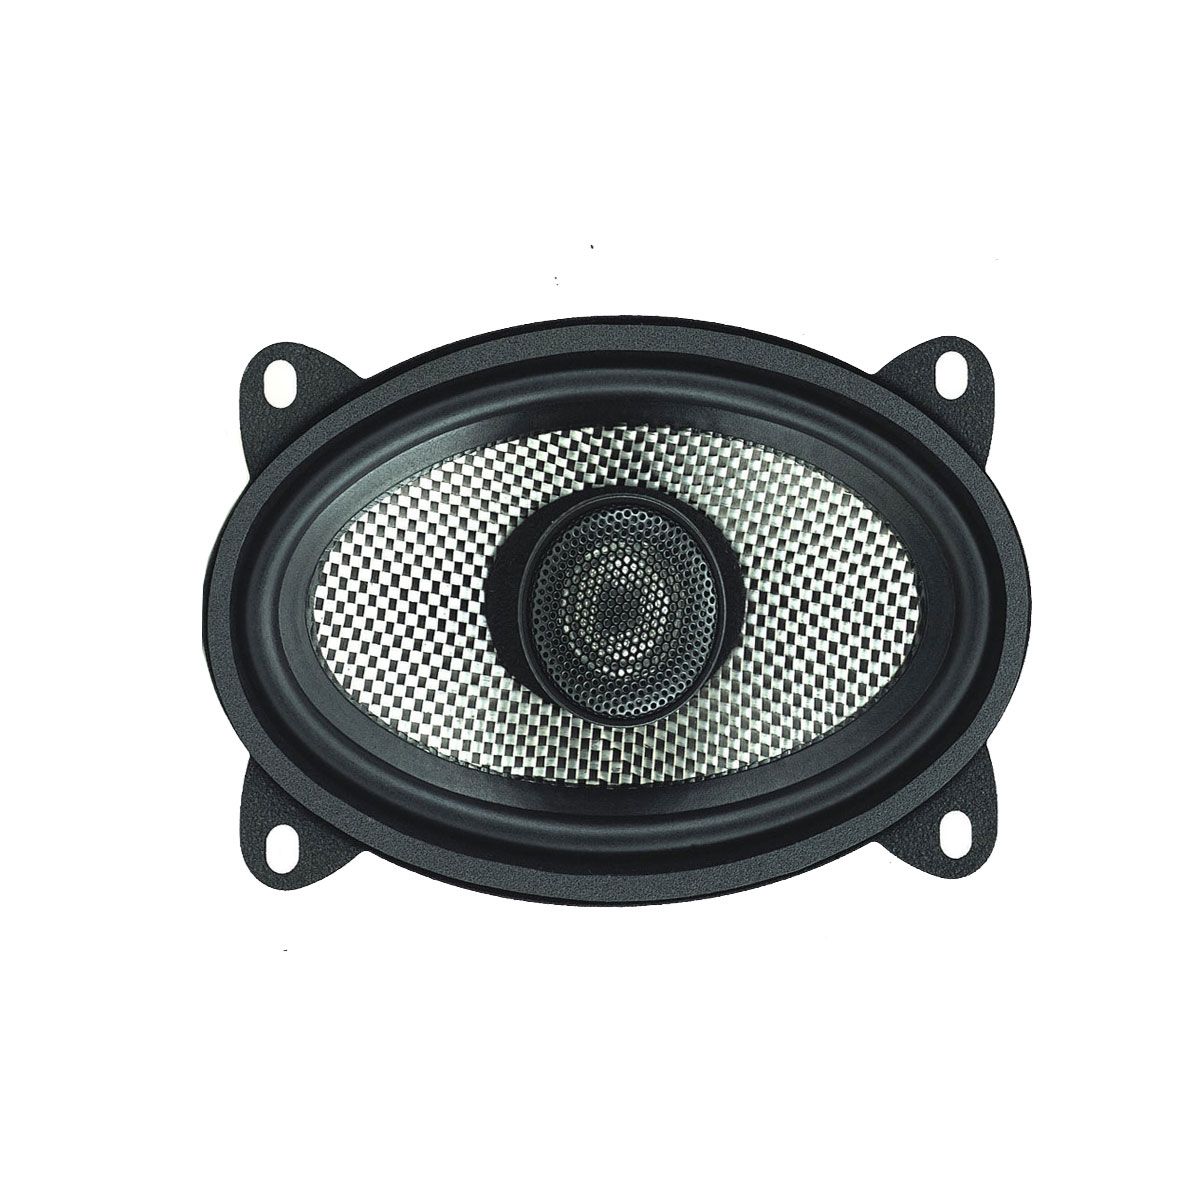 American Bass SQ-4.6 4x6" 2-Way Coaxial Car Speakers 50 Watts 4-Ohm (Pair)